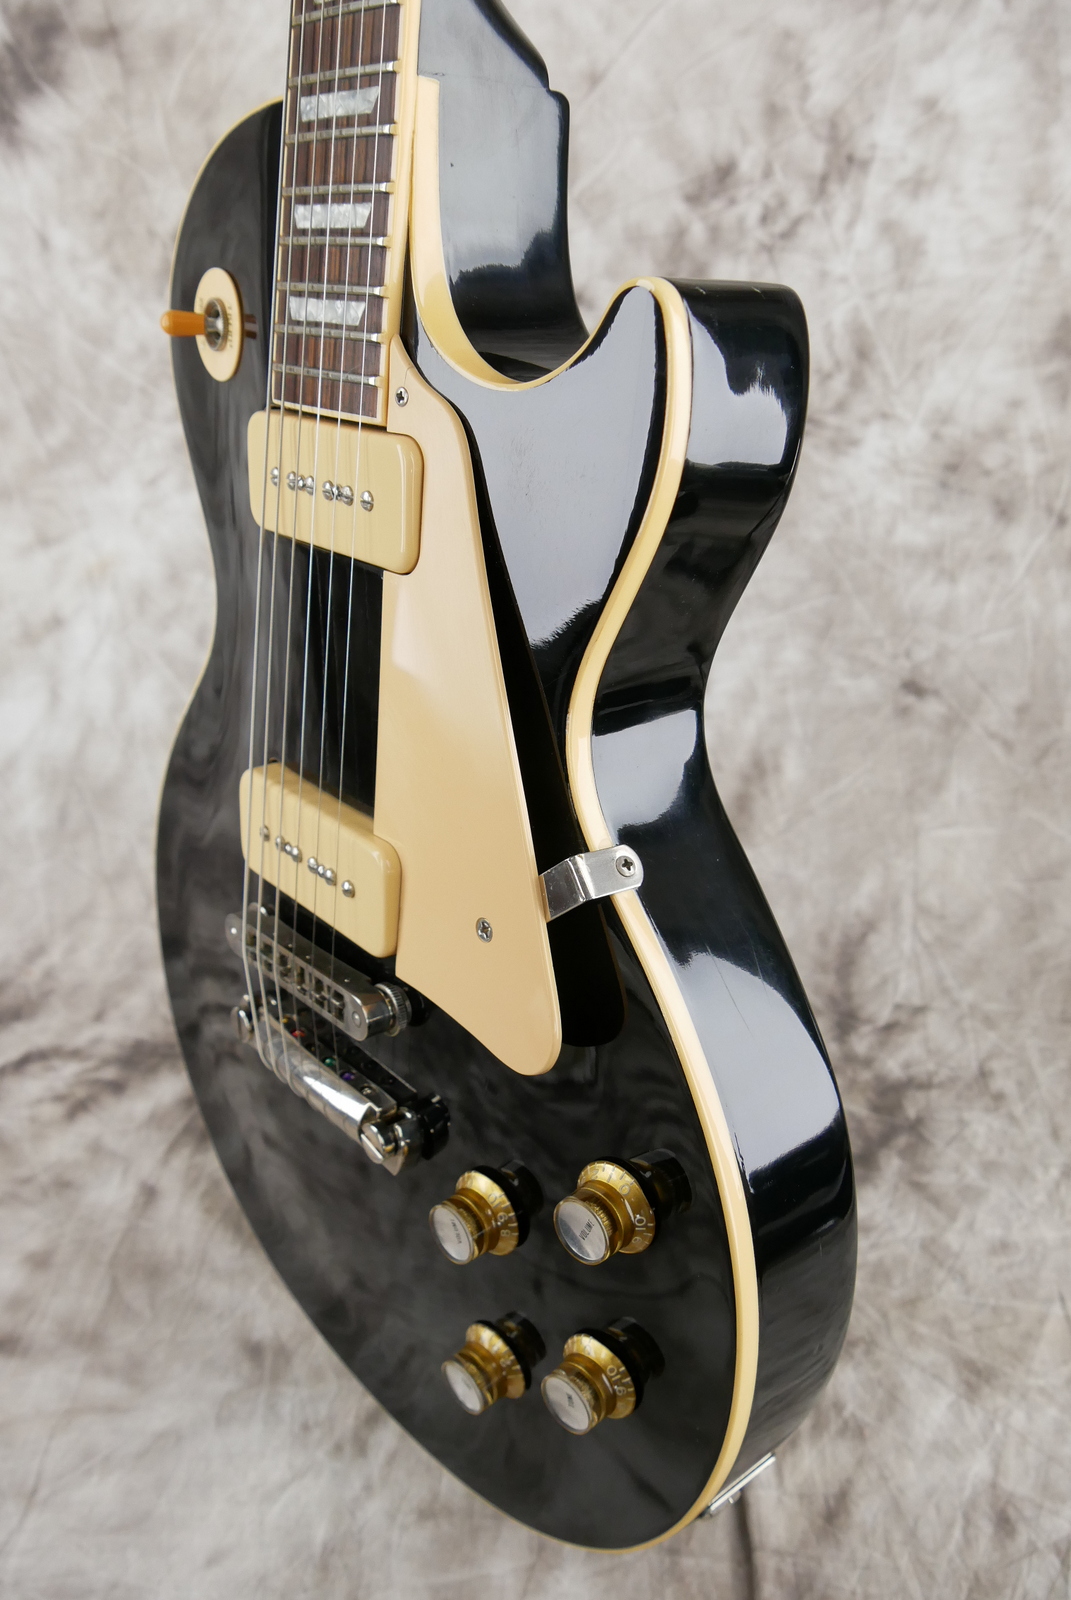 Gibson_Les_Paul_Deluxe_limited_edtion_black_2000-006.JPG